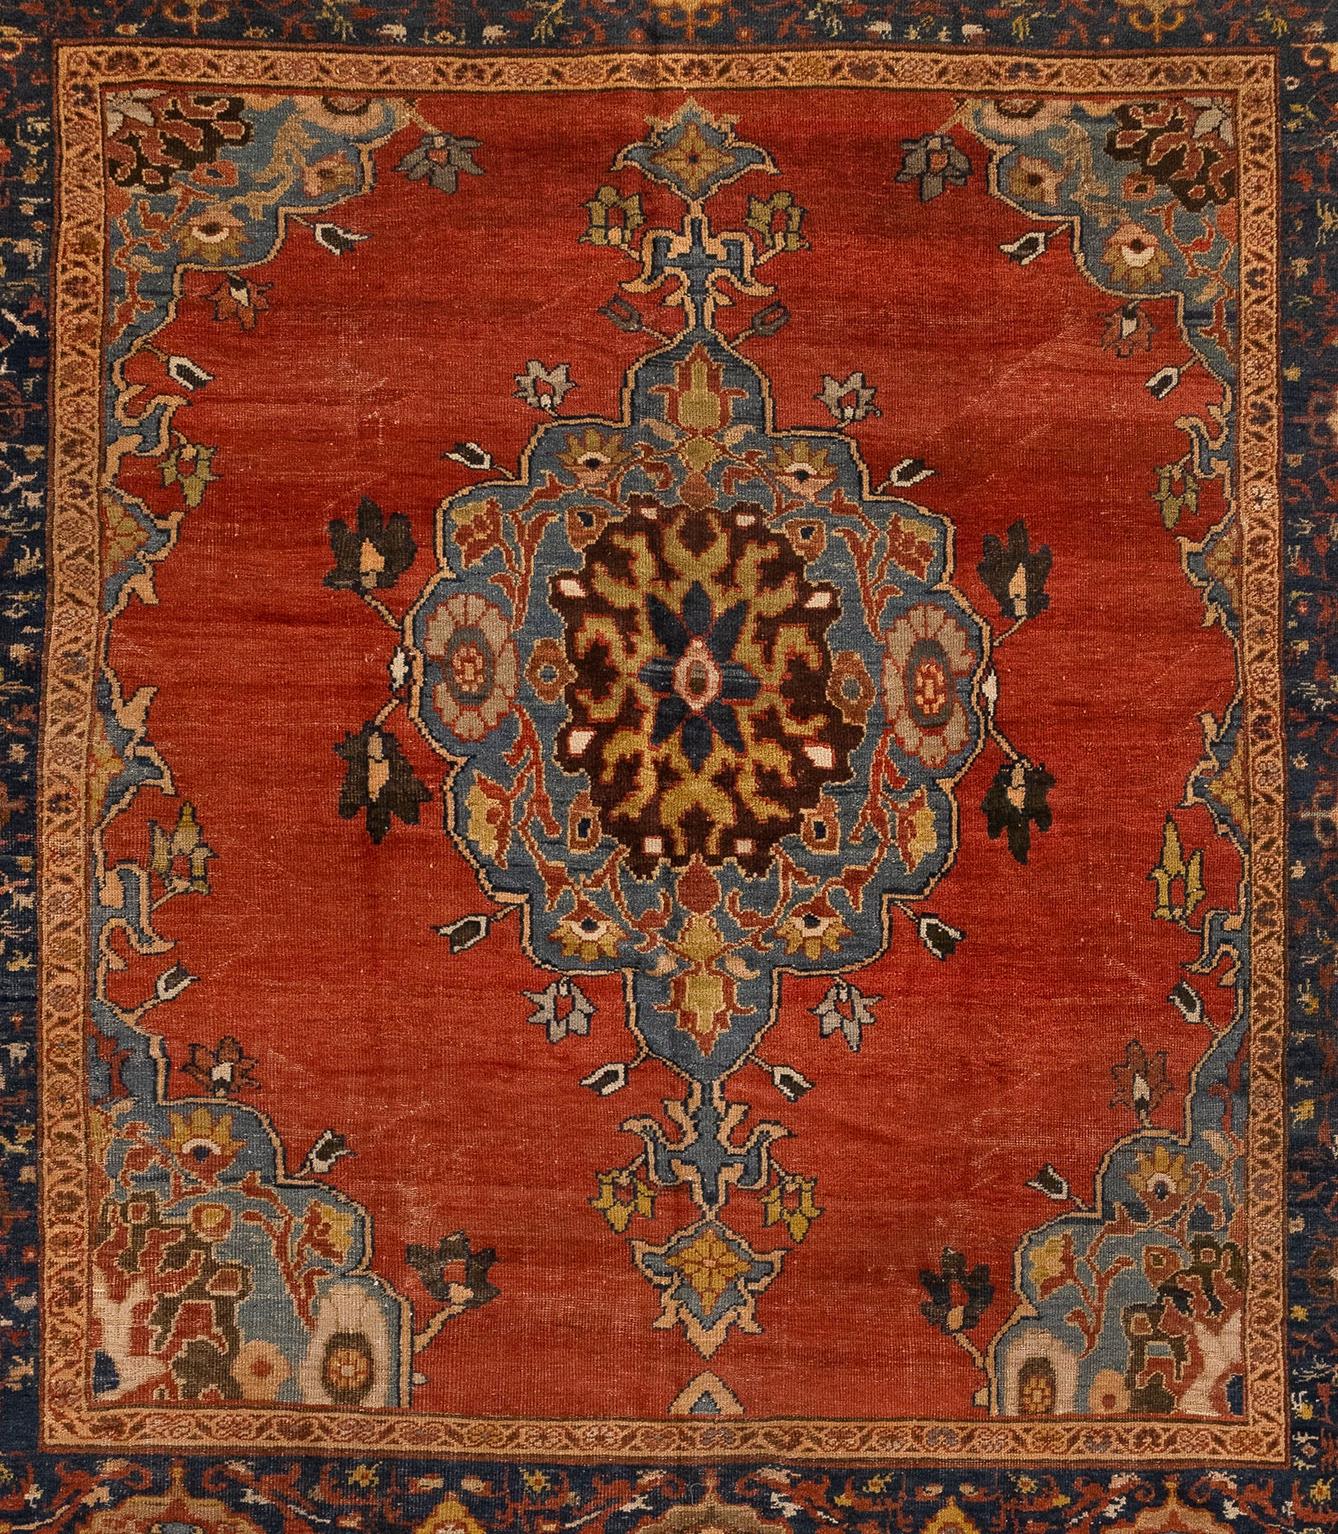 This unique rug is a Sultanabad originating from the city Sultanabad which is now Arak. These rugs played a significant role in the development of traditions and decorative arts in this region.

This Sultanabad can be distinguished by very unique